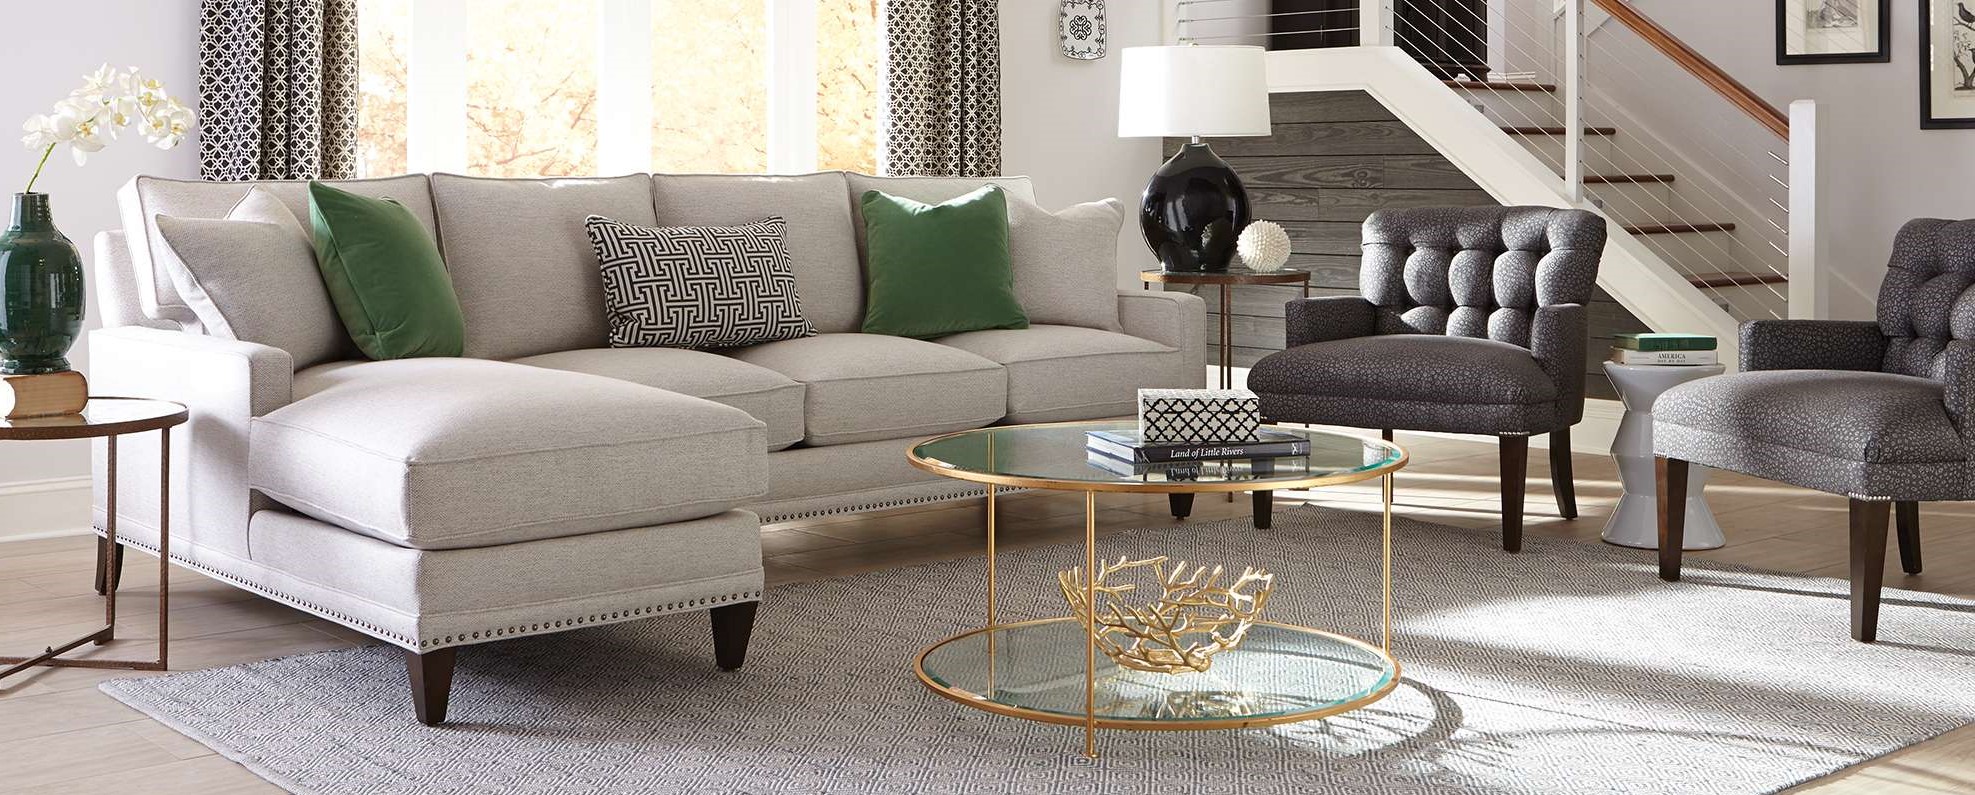 https://directplusfurniture.com/images/rowe%20sectional%20.jpg